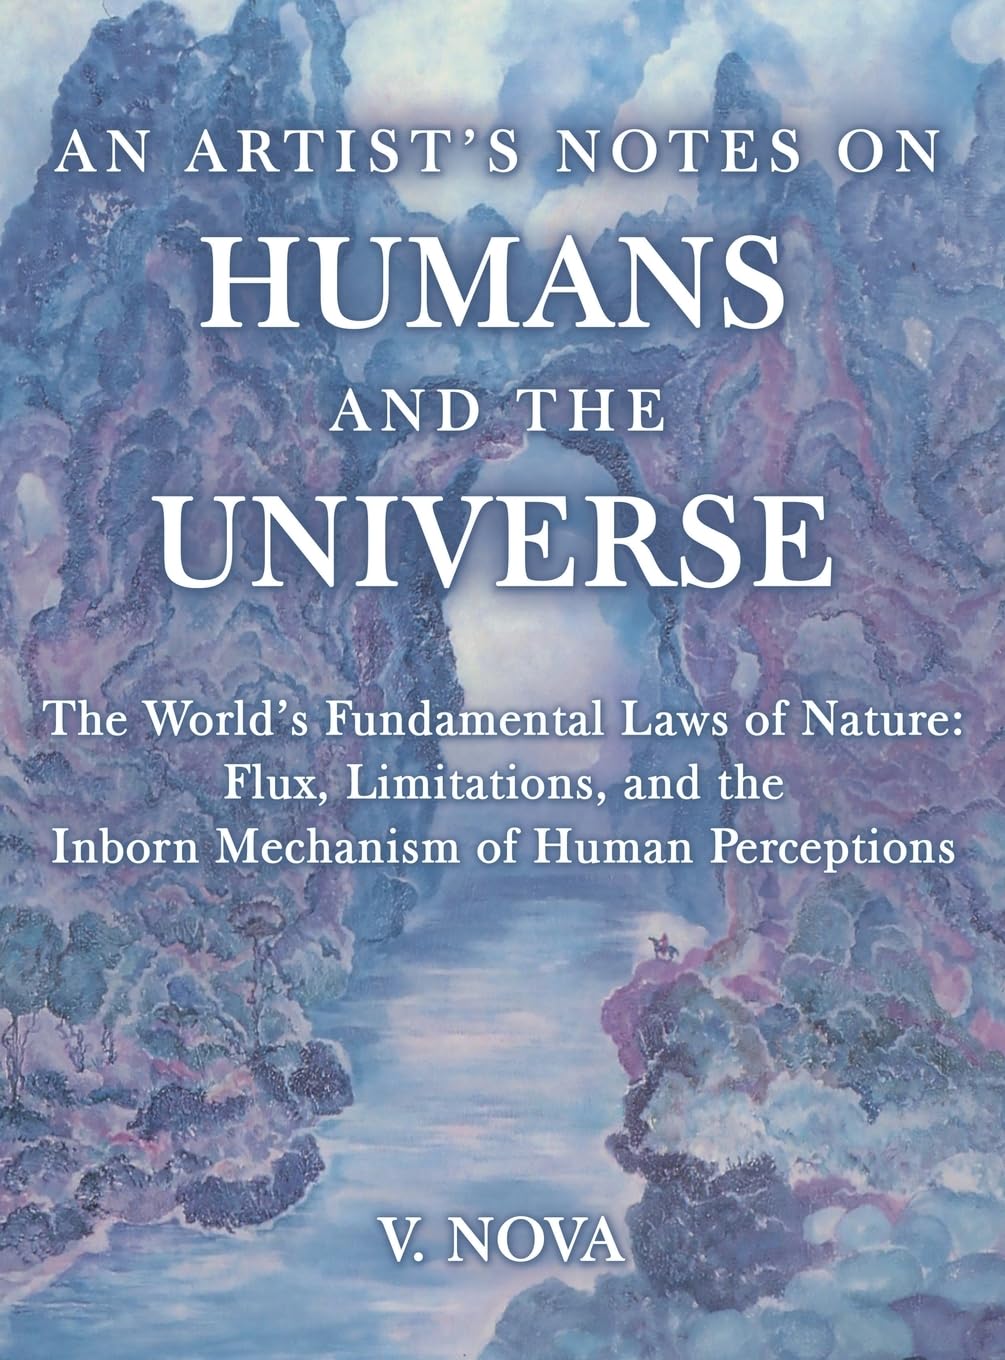 New Book Release: "An Artist’s Notes On Humans And The Universe" By V. Nova